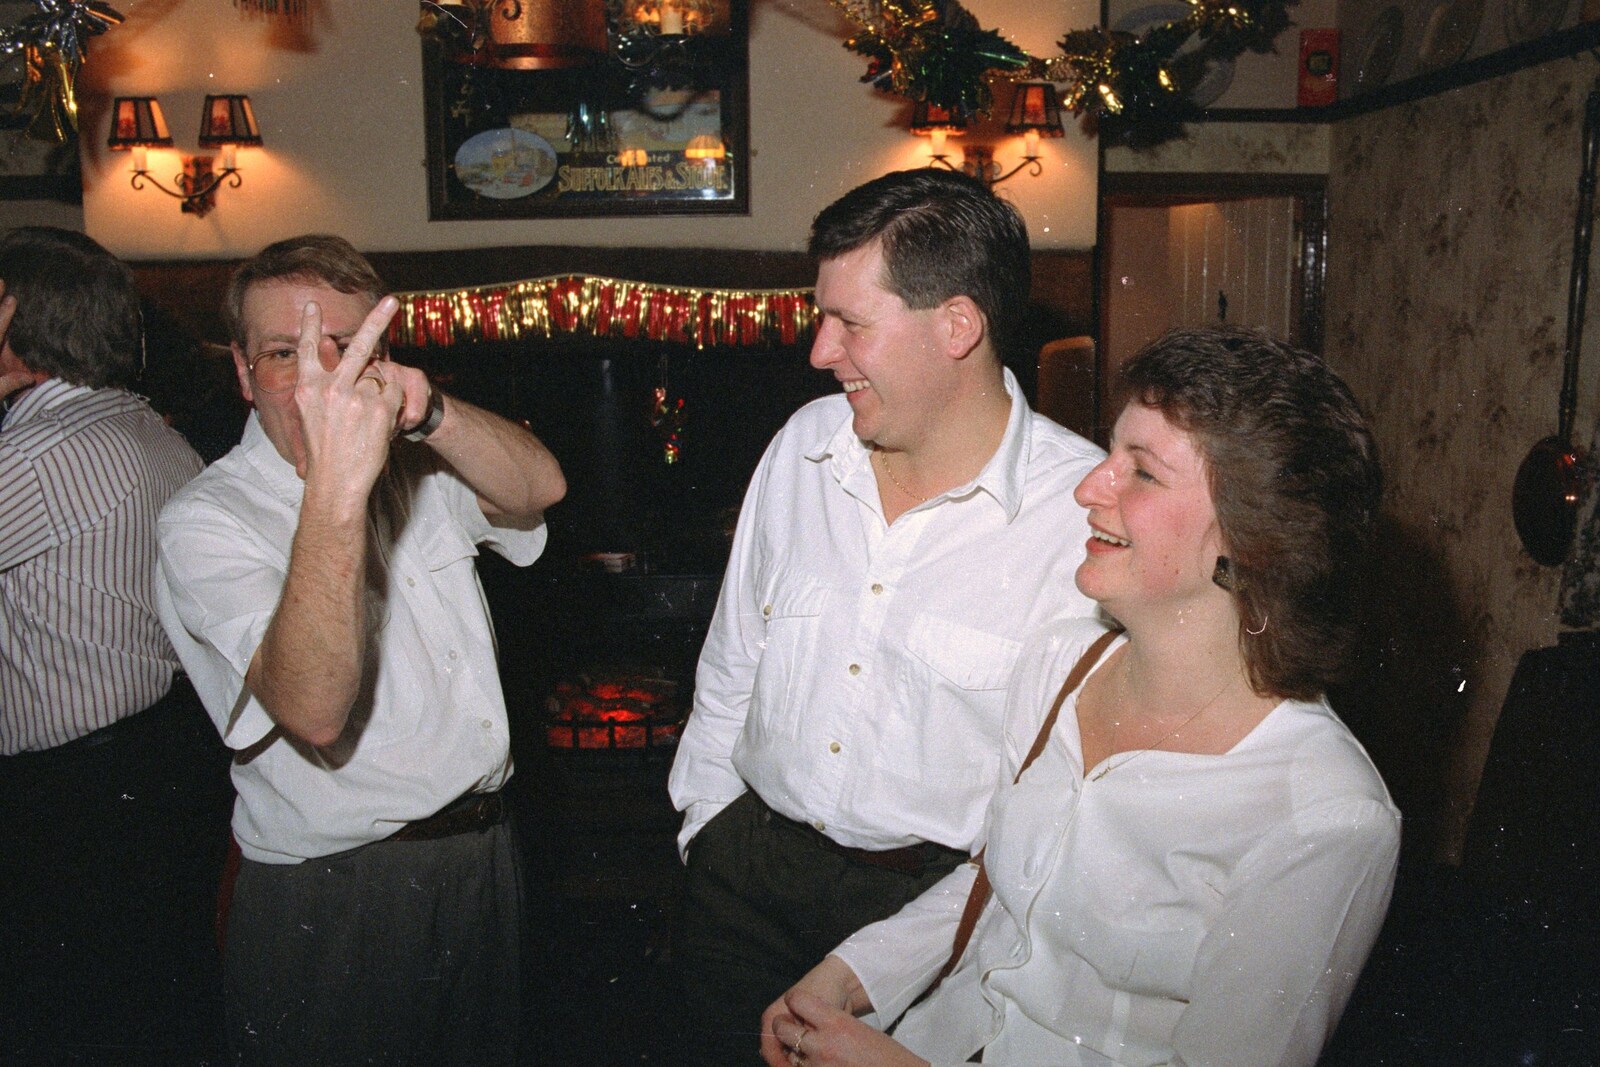 John Willy gives the V sign from New Year's Eve at the Swan Inn, Brome, Suffolk - 31st December 1991